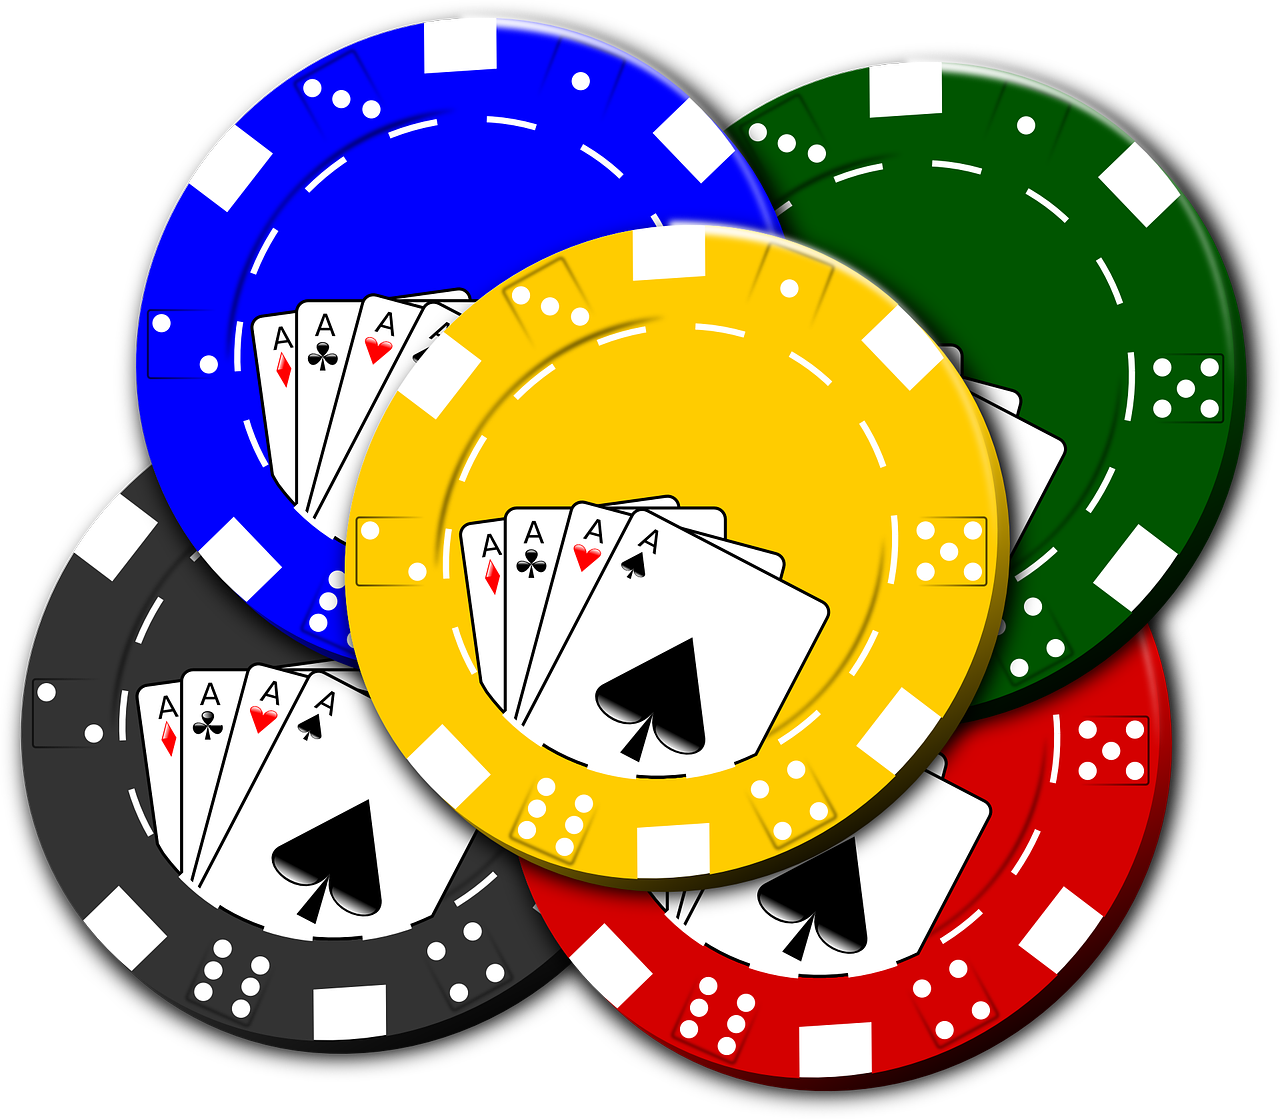 Chips and cards image